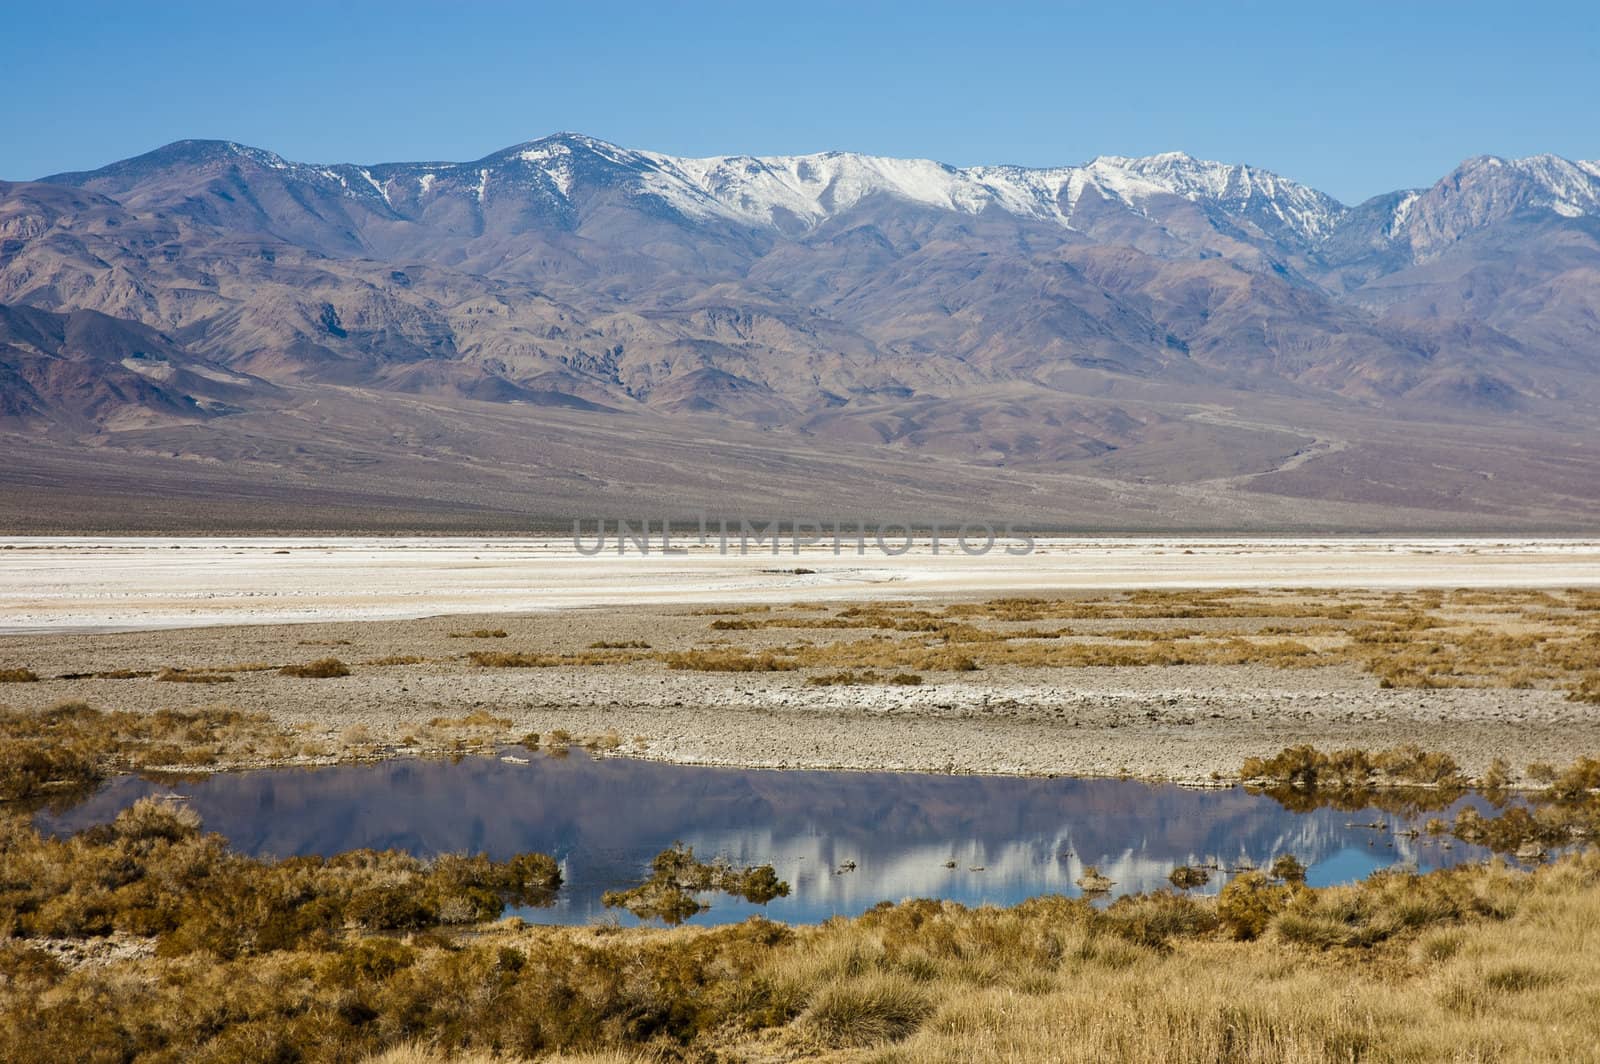 Seasonal lake formed in Death Valley during January with snow on the mountains